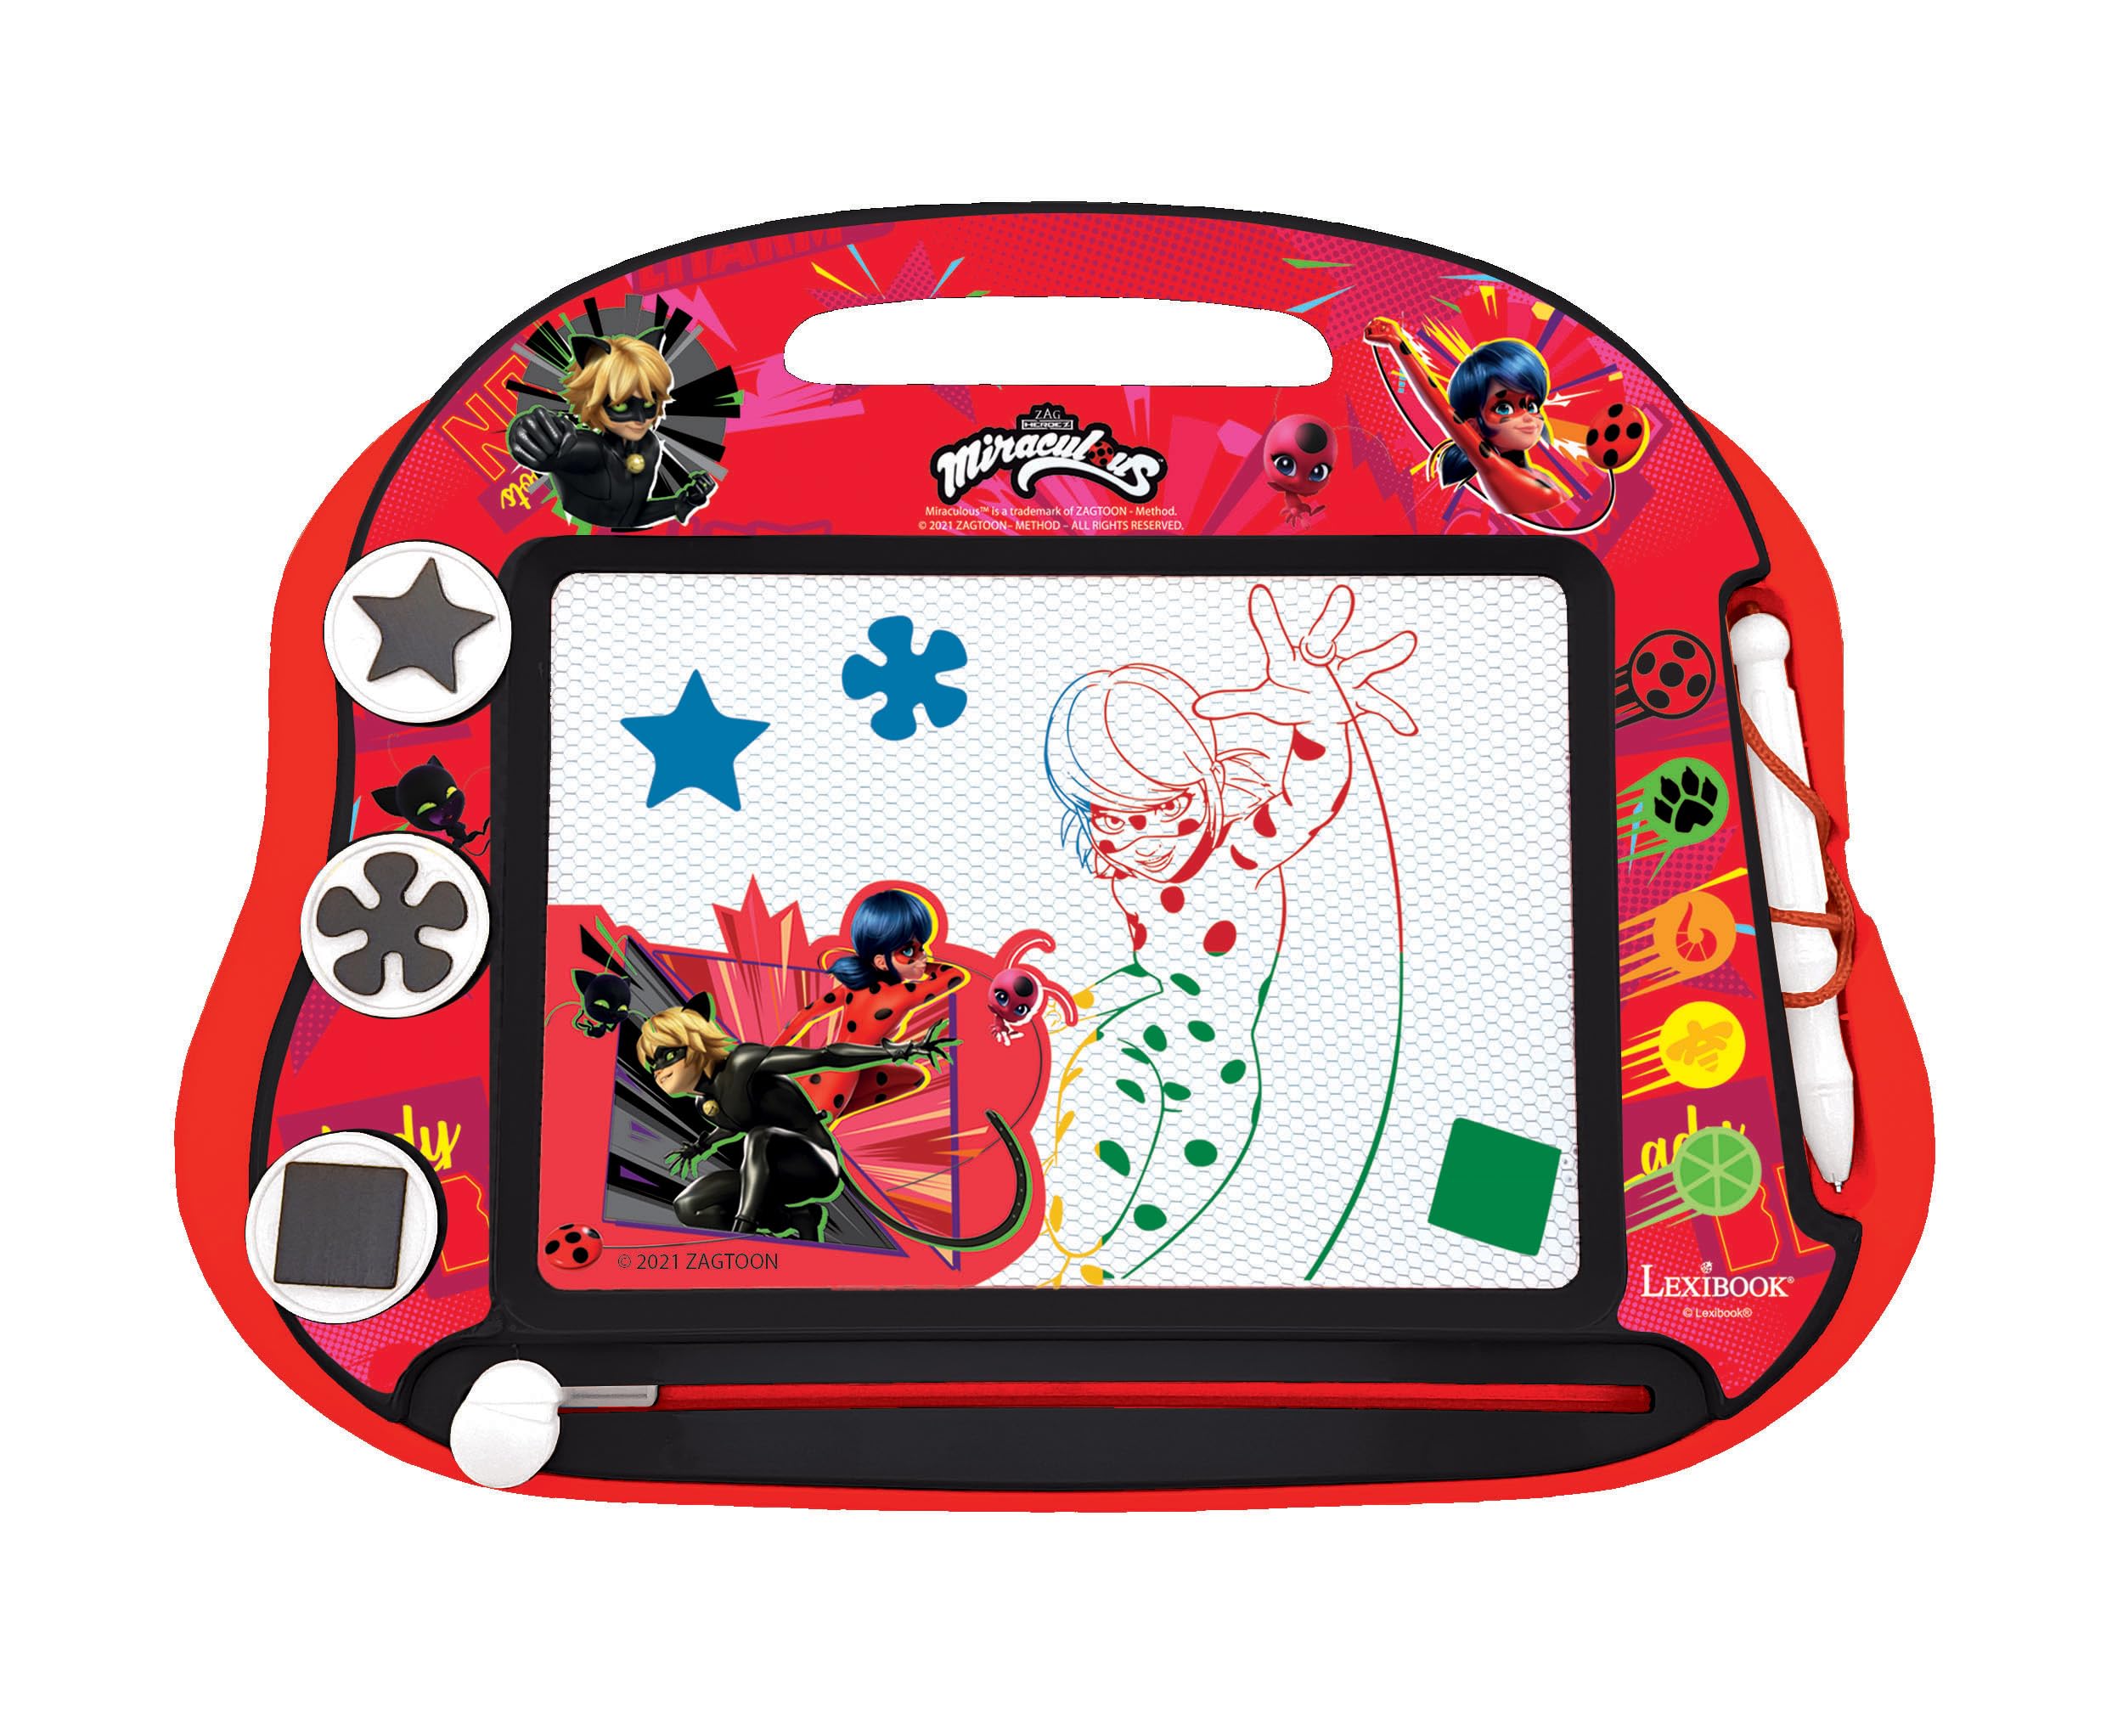 LEXiBOOK, Miraculous Ladybug Cat Noir, Multicolor Magic Magnetic Drawing Board, Artistic Creative Toy for Girls and Boys, Stylus Pen and Stamps, Red/Black, CRMI550